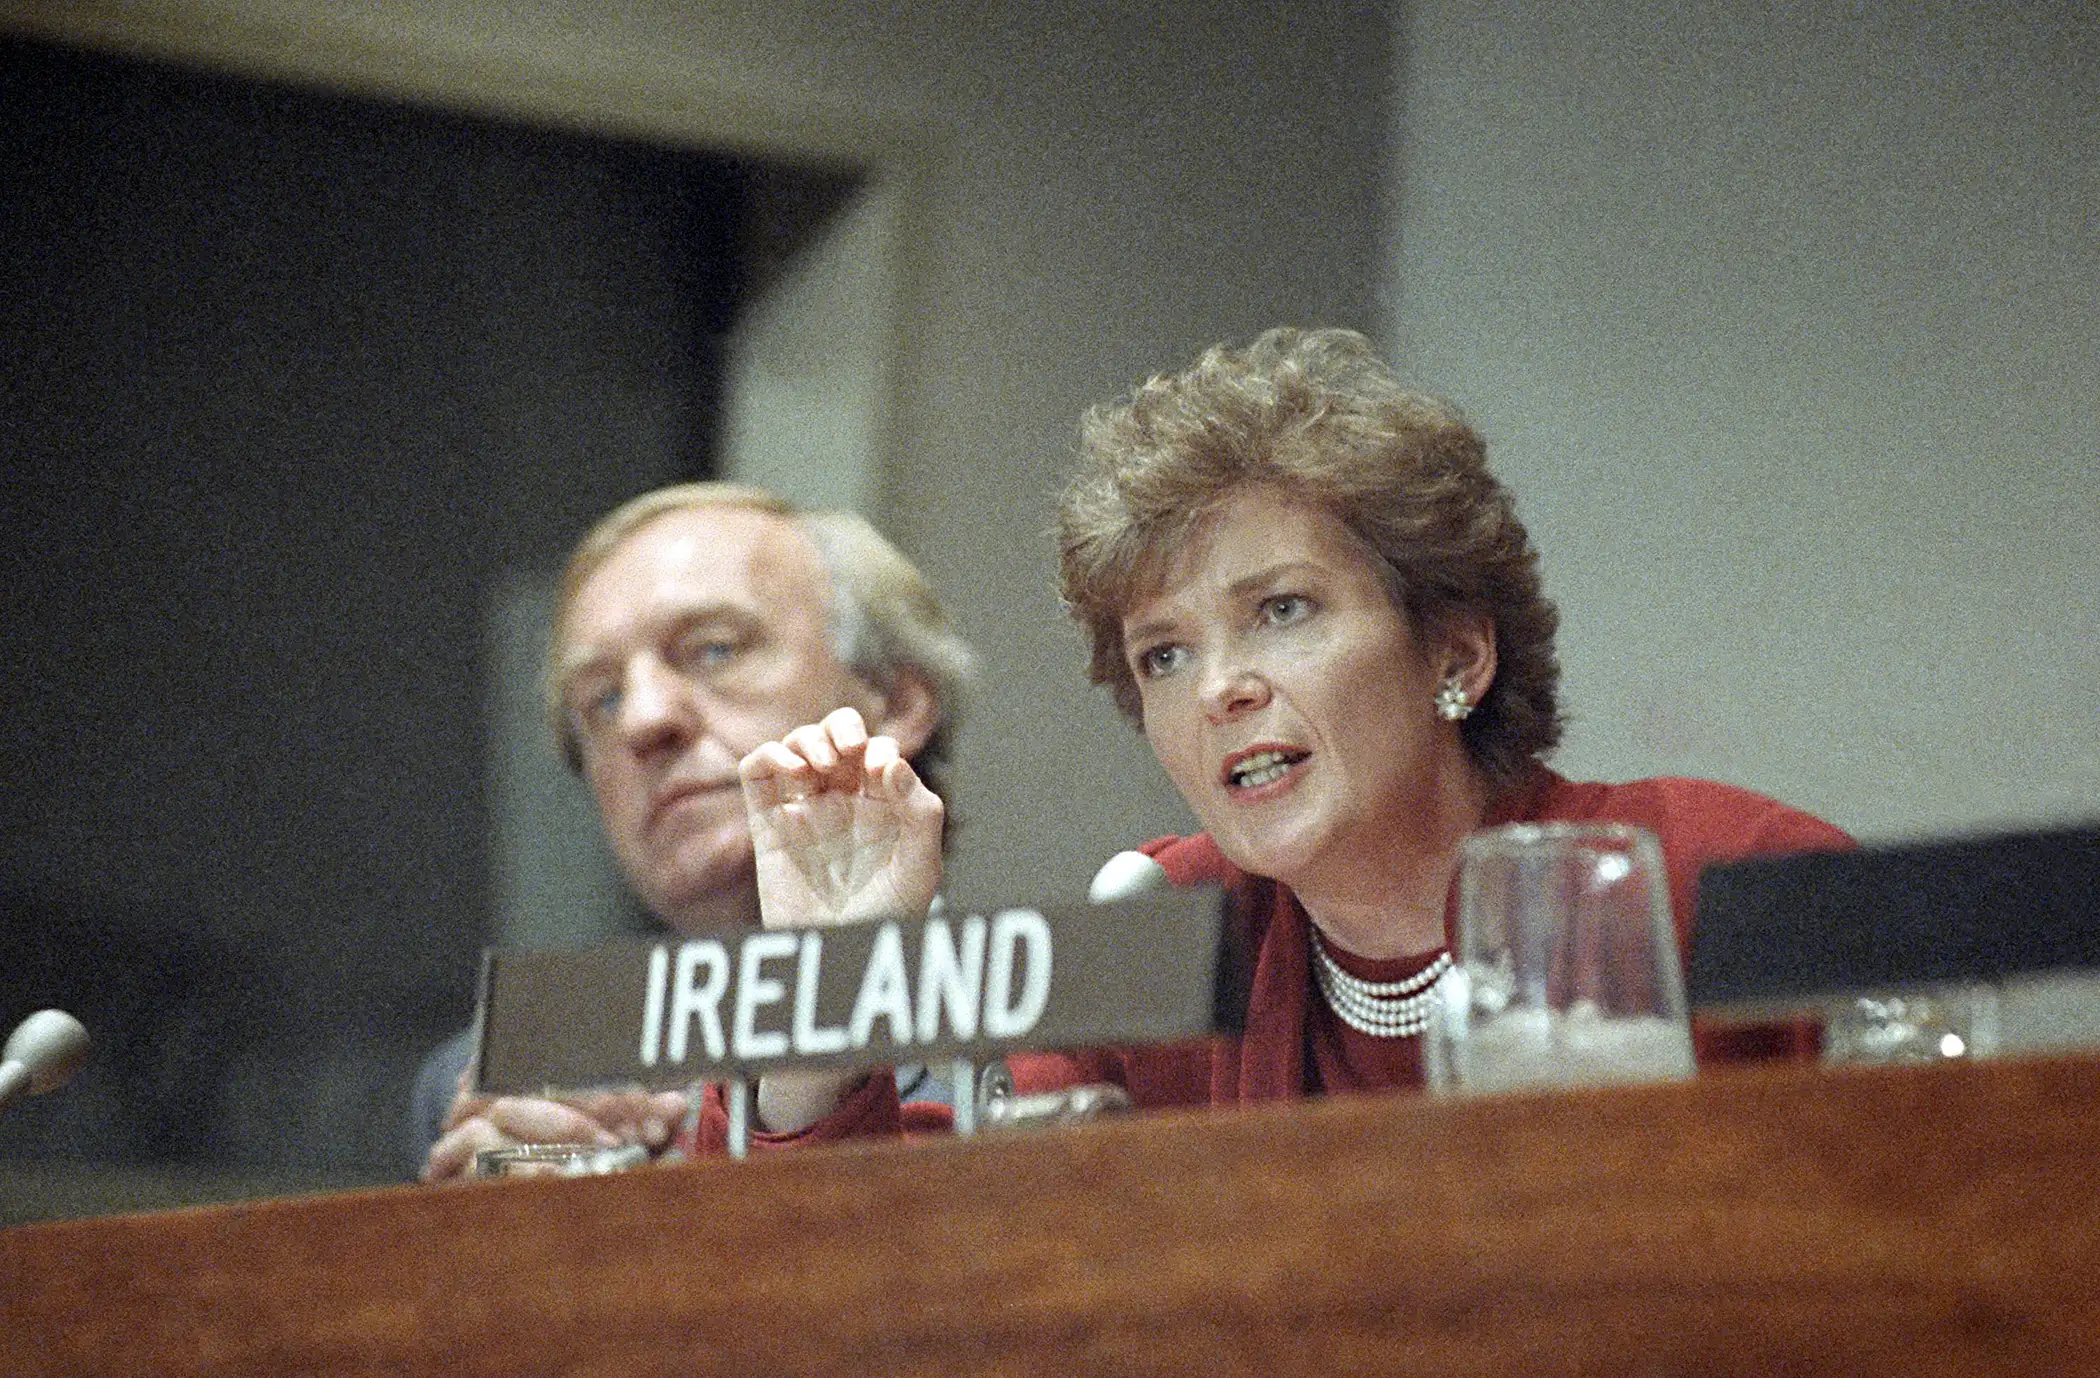 Irish President Mary Robinson, right, is joined by Irish Foreign Minister David Andrews during a news conference at the United Nations, October 7, 1992, New York.